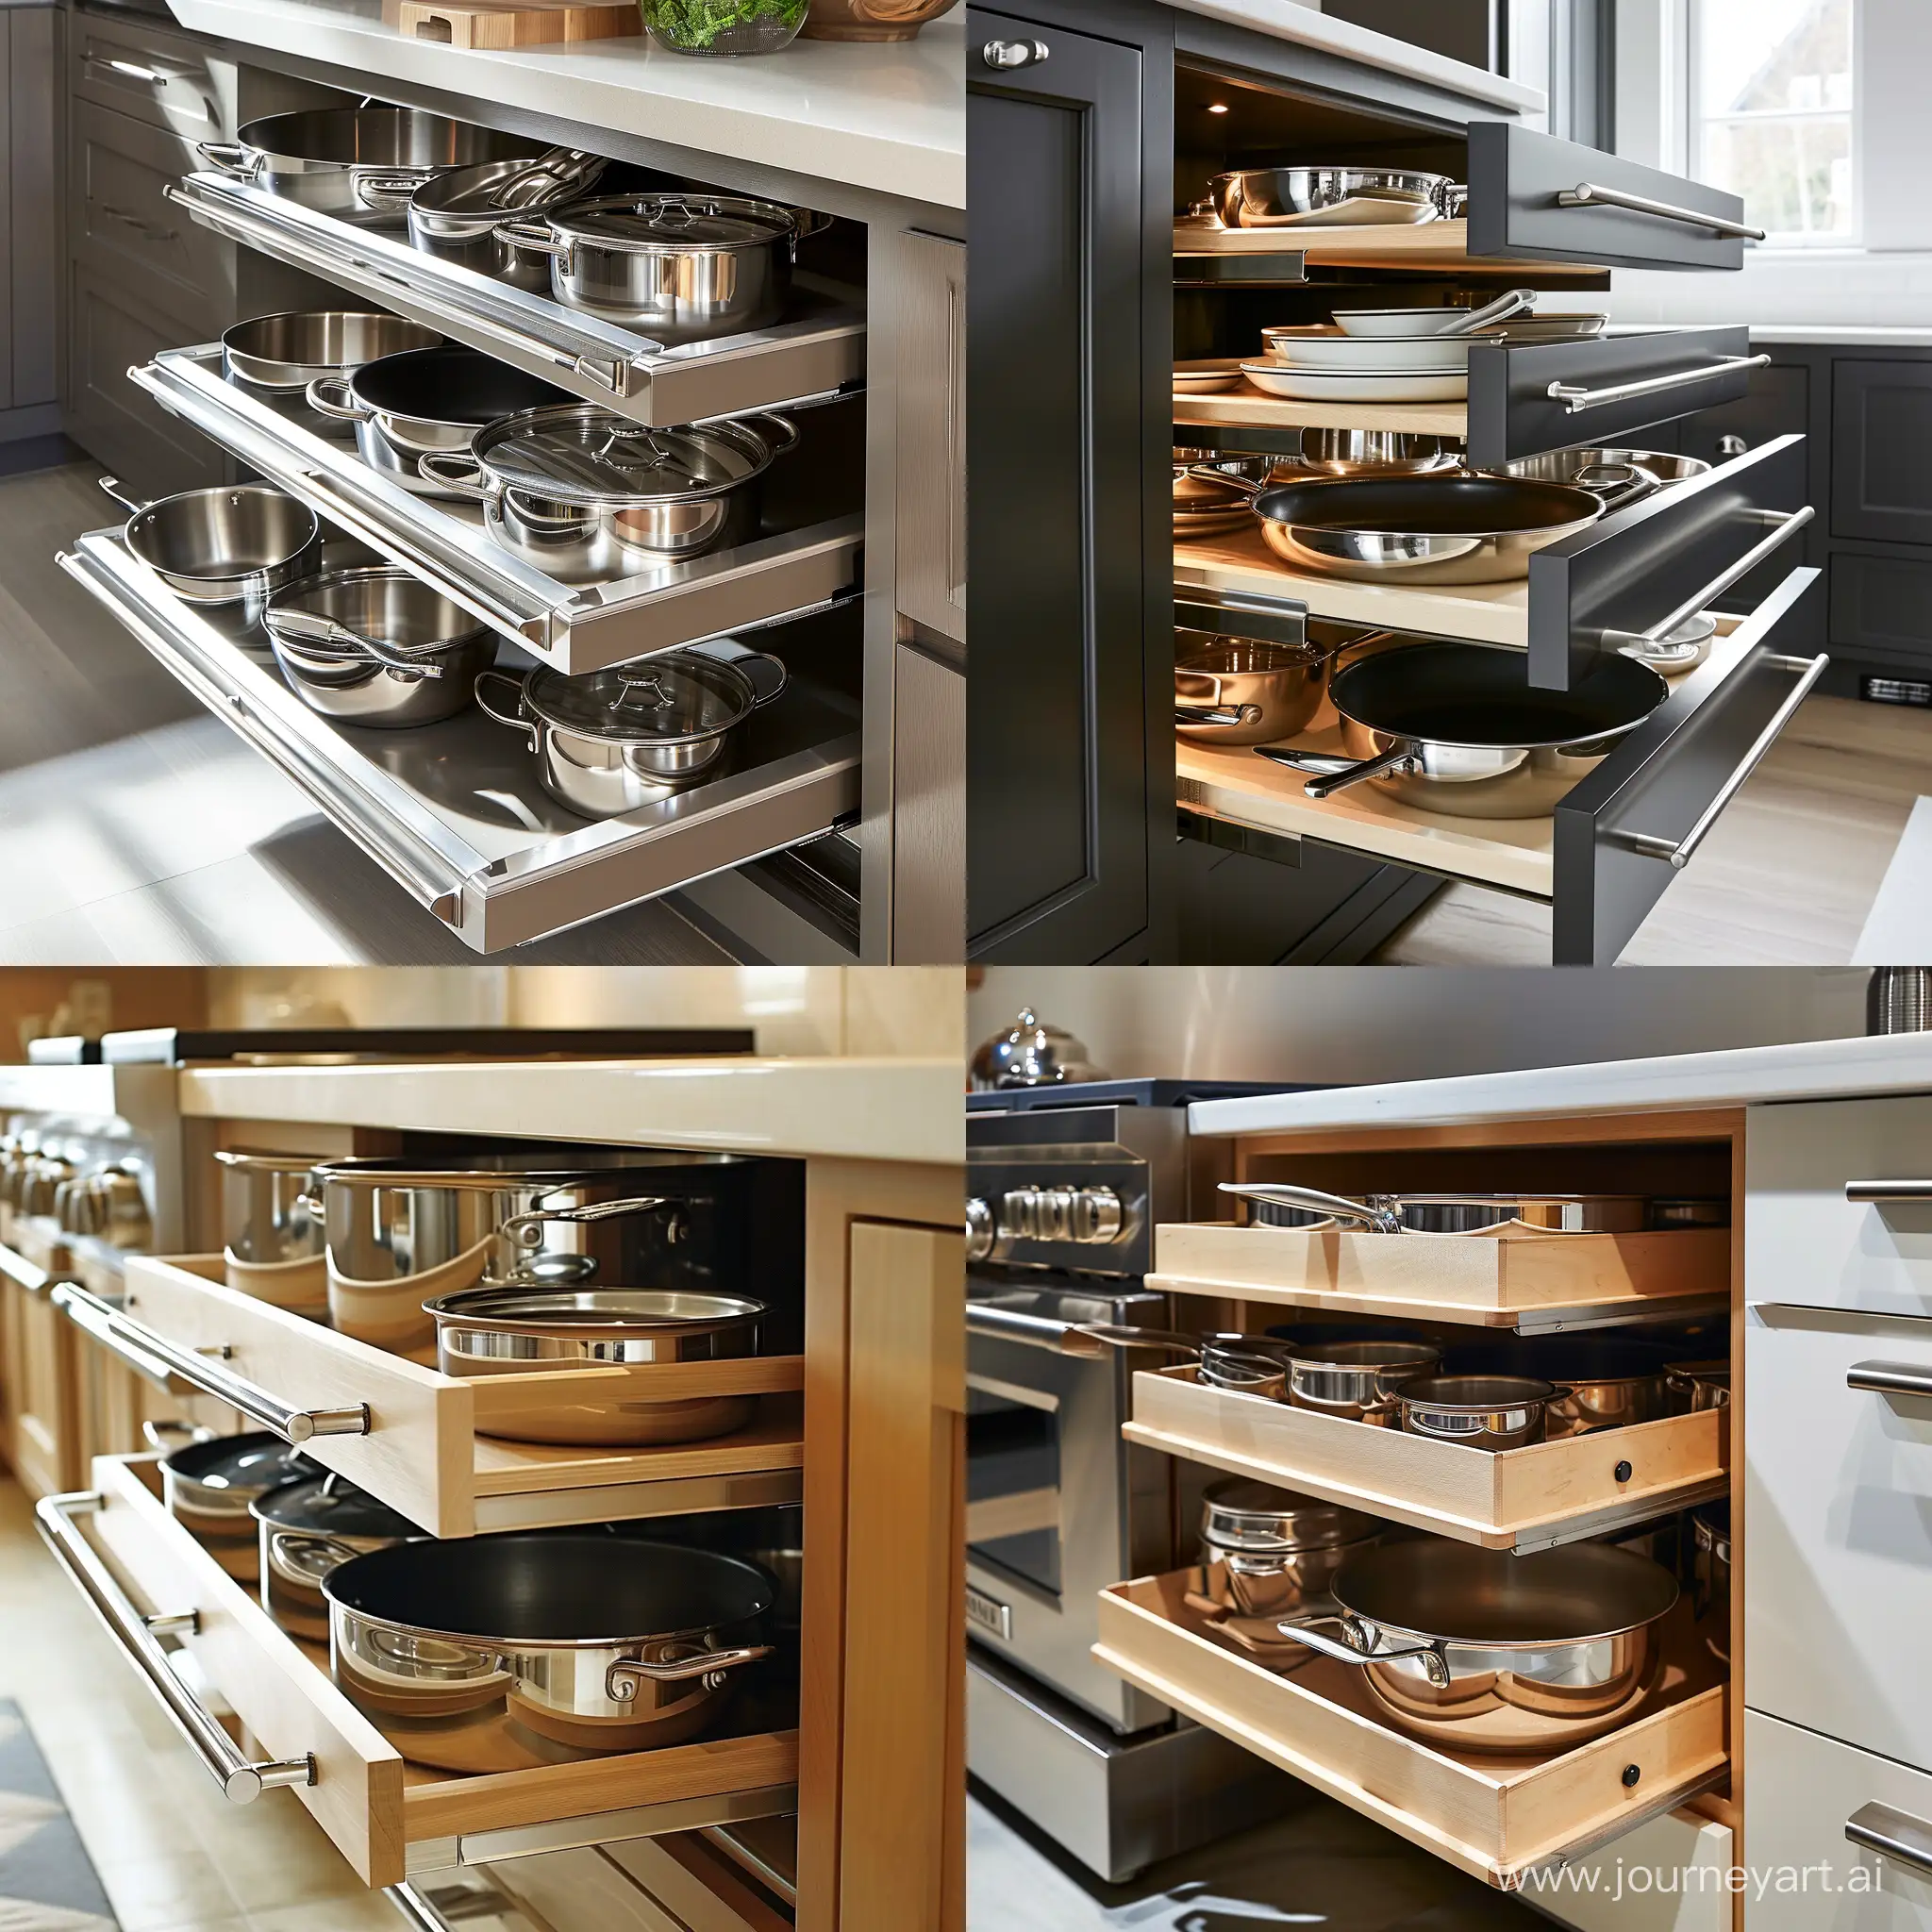 SpaceSaving-GlideOut-Shelves-for-Pans-and-Pots